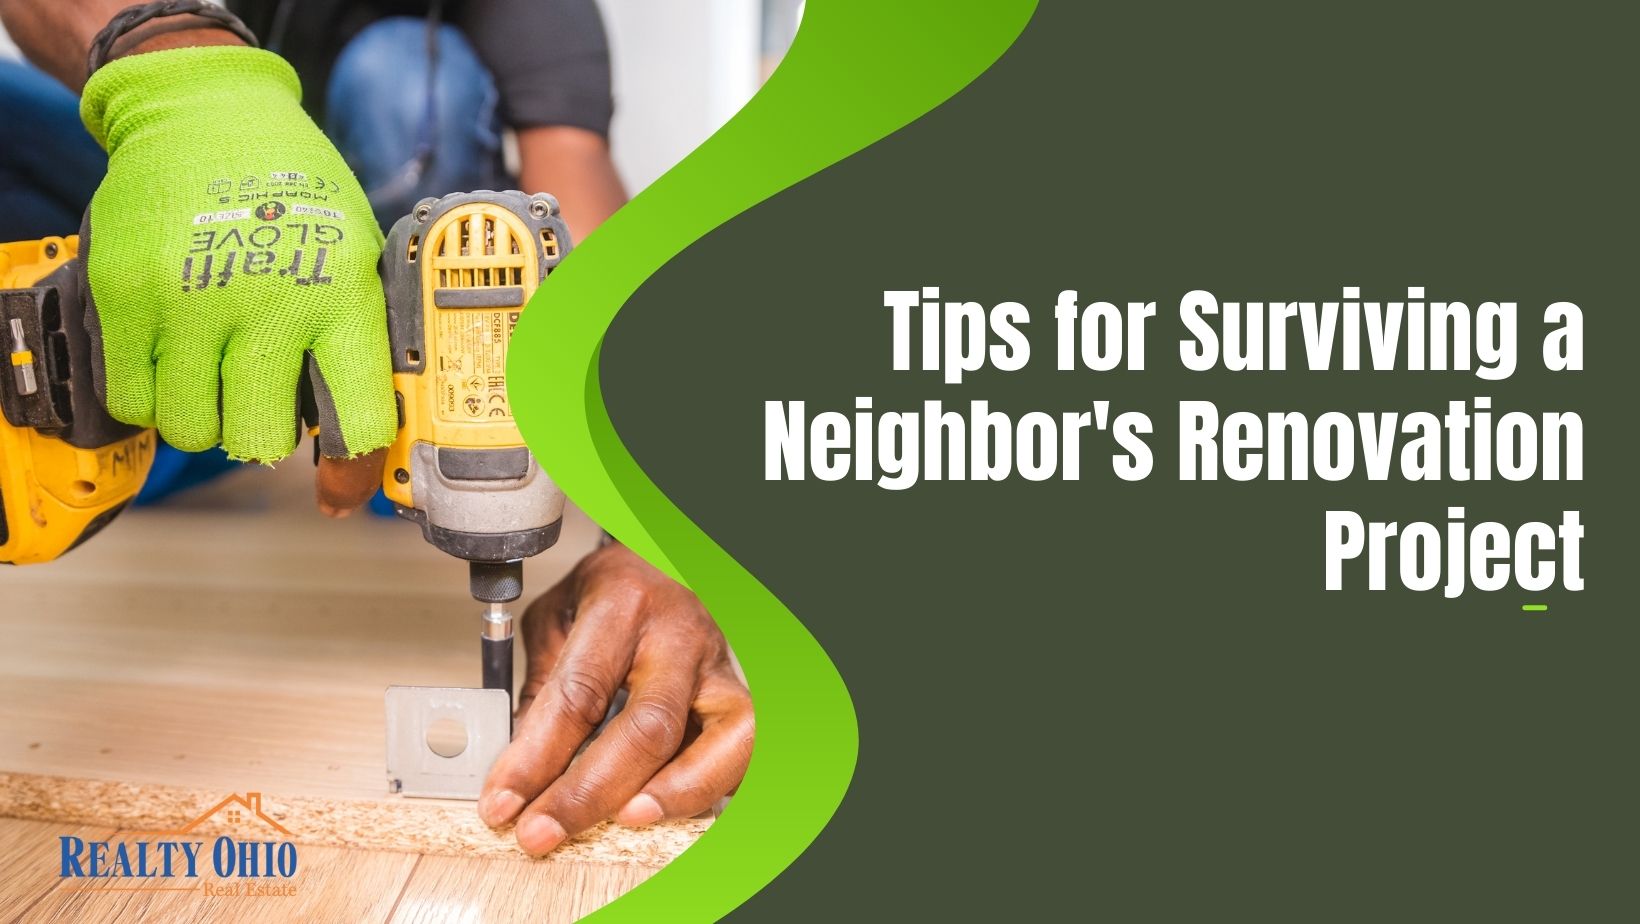 Tips for Surviving a Neighbor's Renovation Project